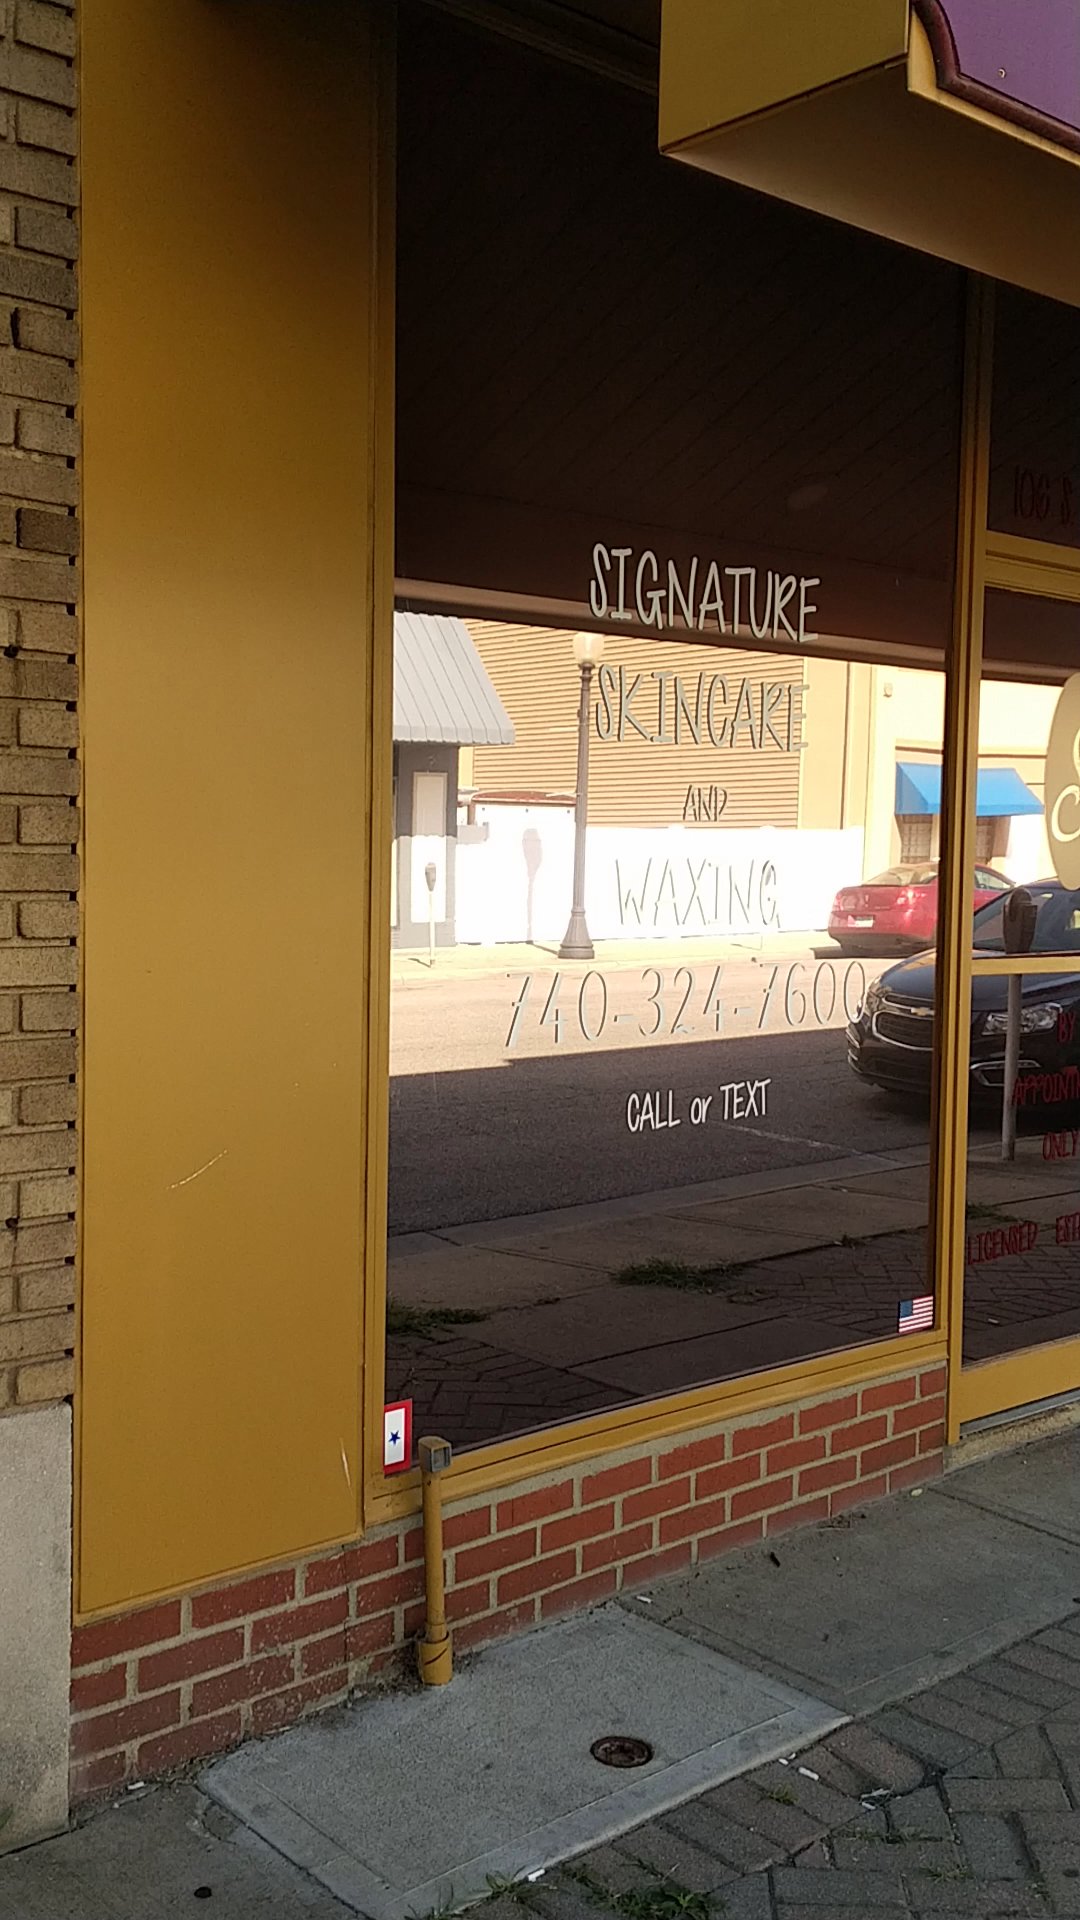 Signature Skincare and Waxing 106 S 4th St, Martins Ferry Ohio 43935